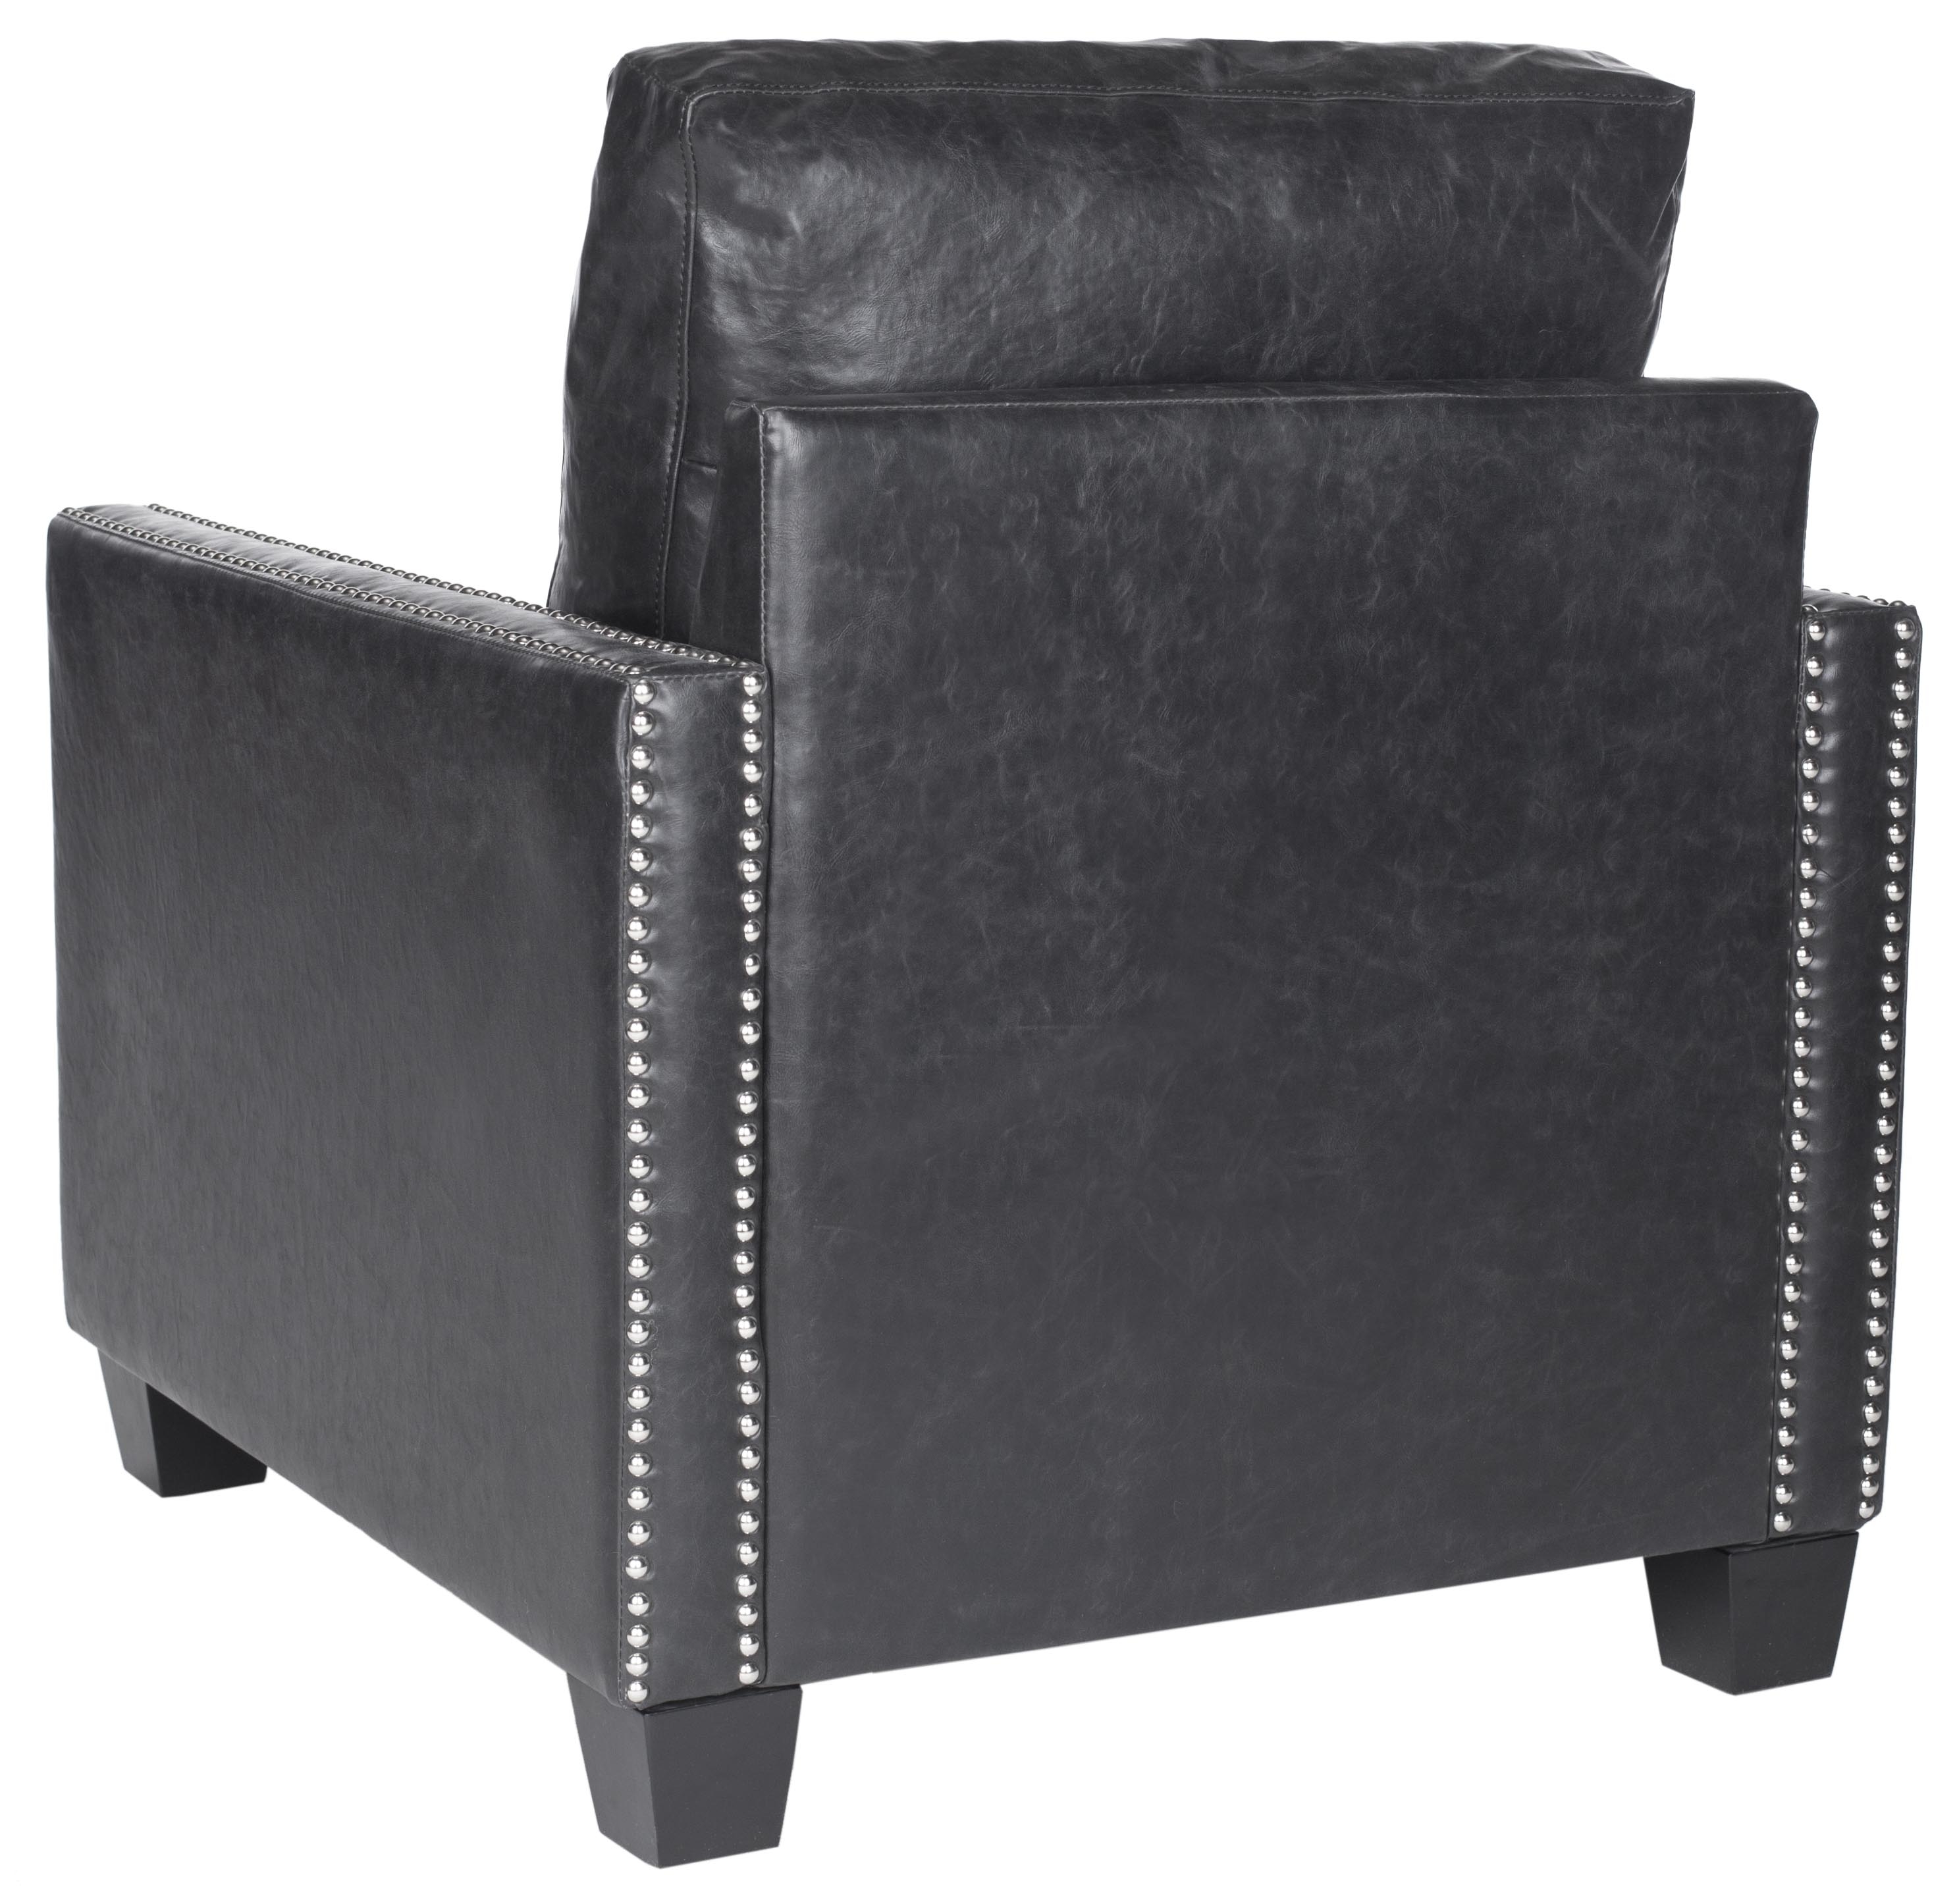 Horace Leather Club Chair - Silver Nail Heads - Antique Black/Black - Arlo Home - Image 2